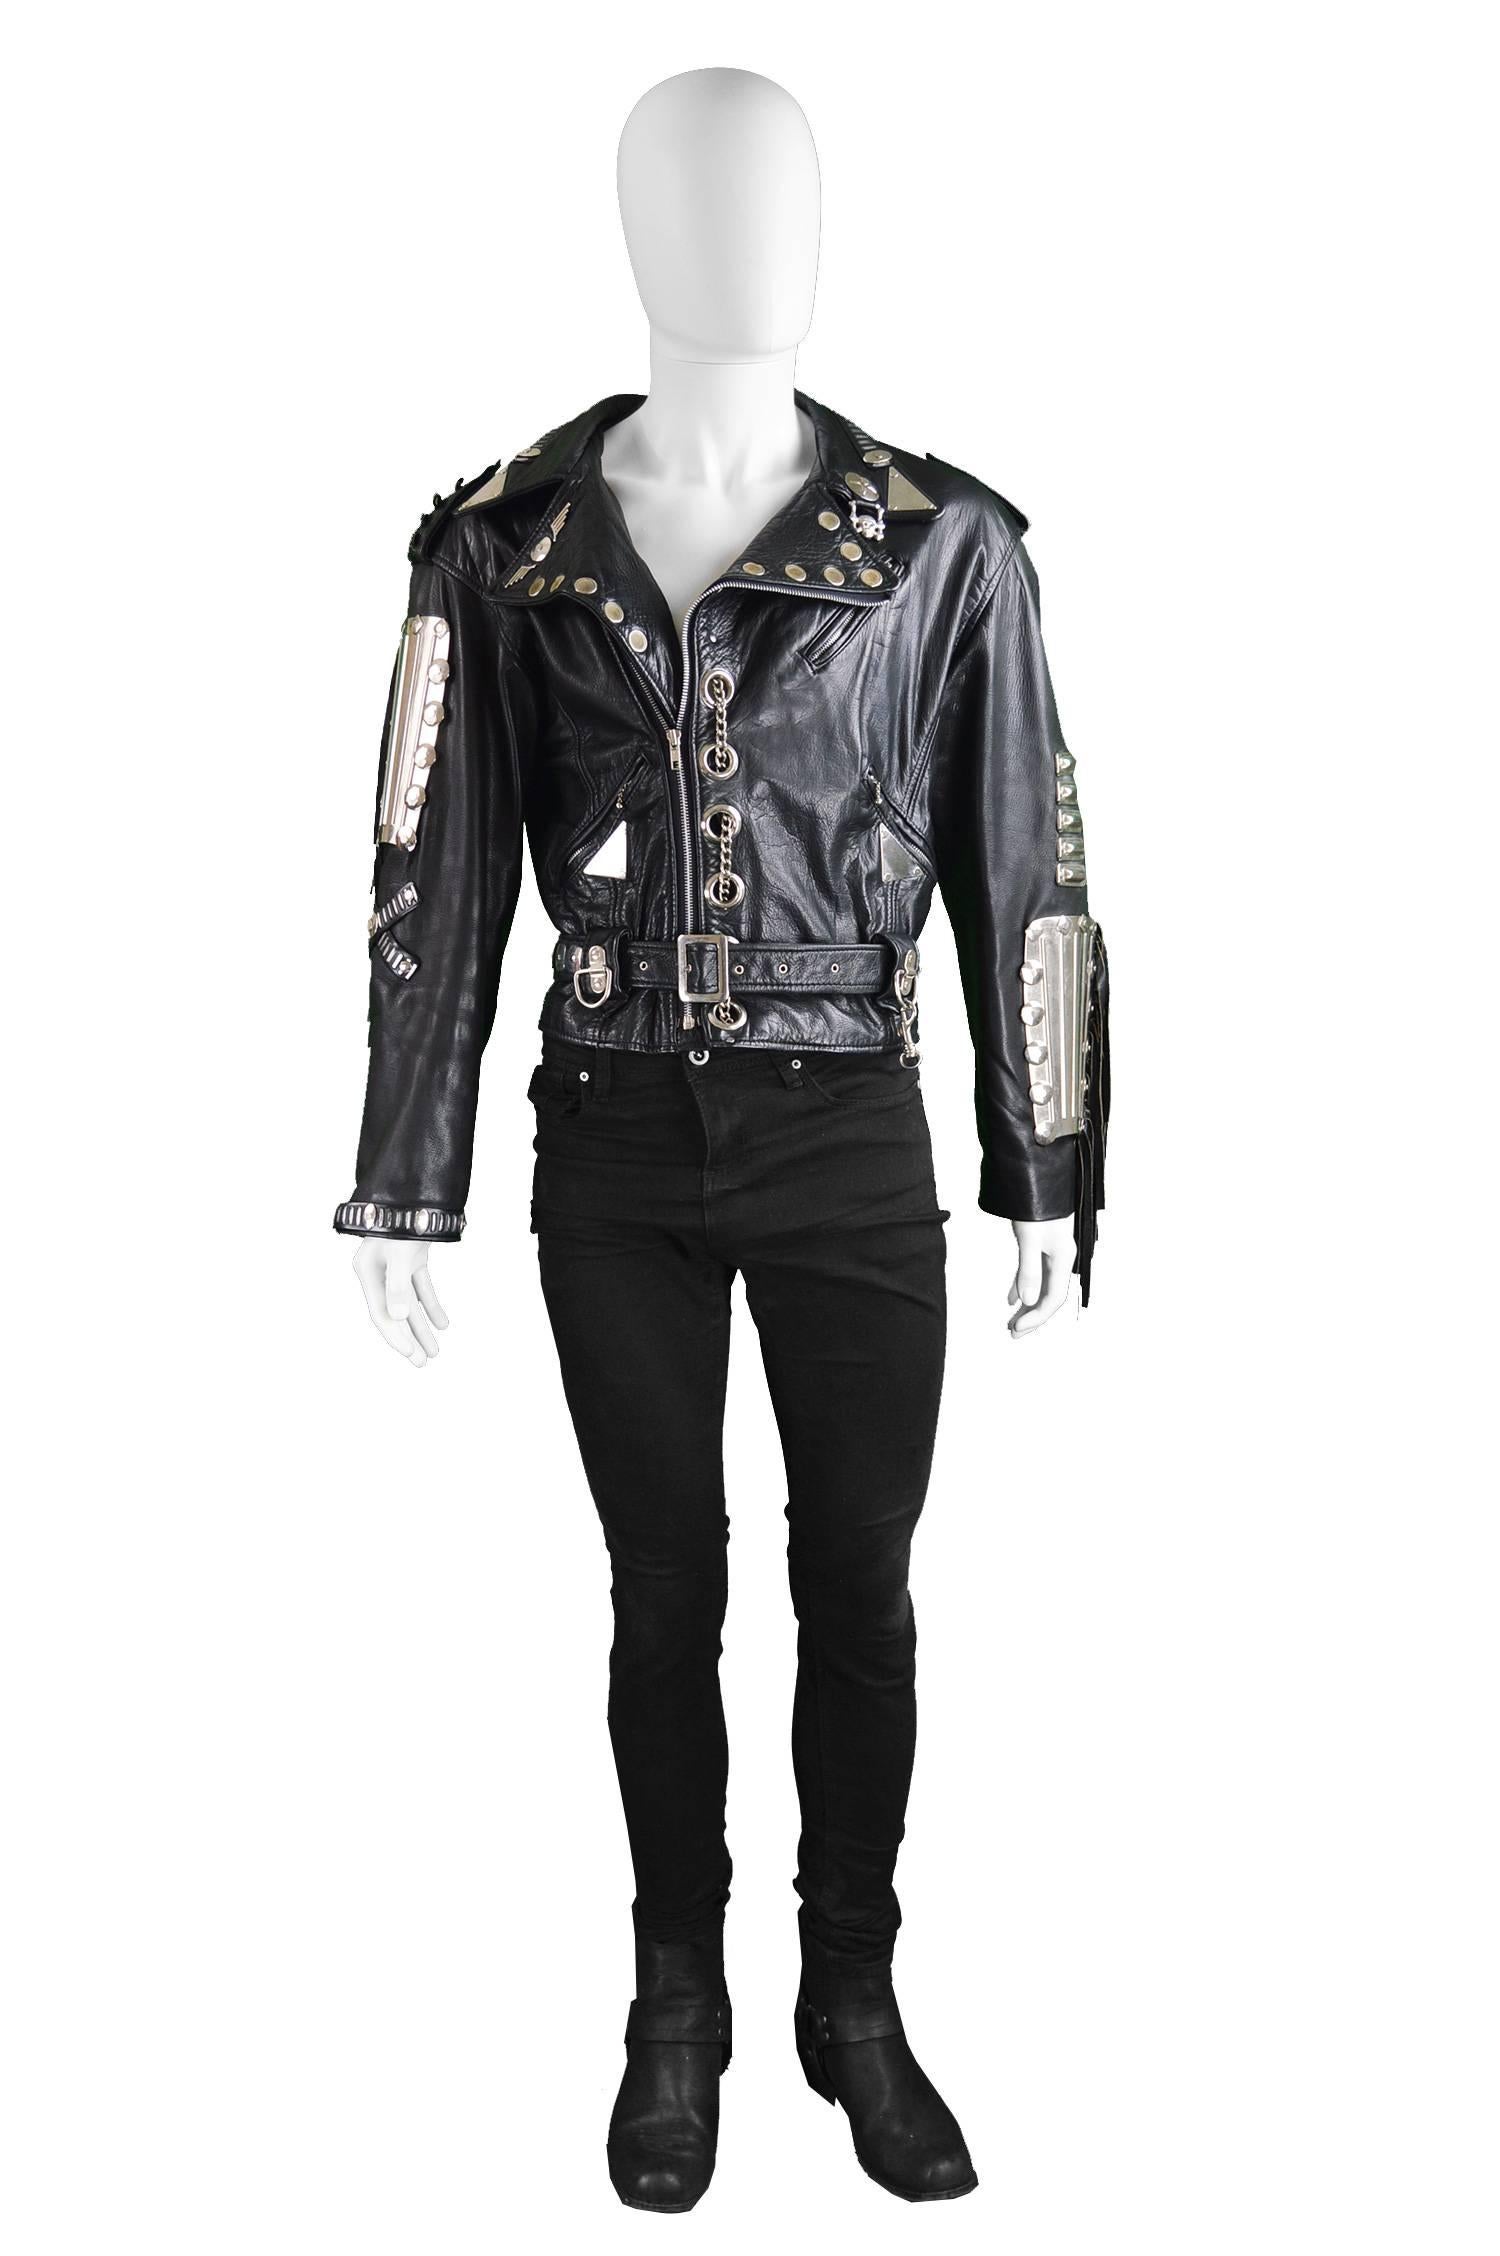 Kim Hadleigh Designs Vintage Mens Armor Plated Leather Jacket, 1980s

Size: Marked M but would also suit a men's Small. 
Chest - 42” / 106cm (allow a couple of inches room for movement)
Length (Shoulder to Hem) - 22” / 56cm
Shoulder to Shoulder -